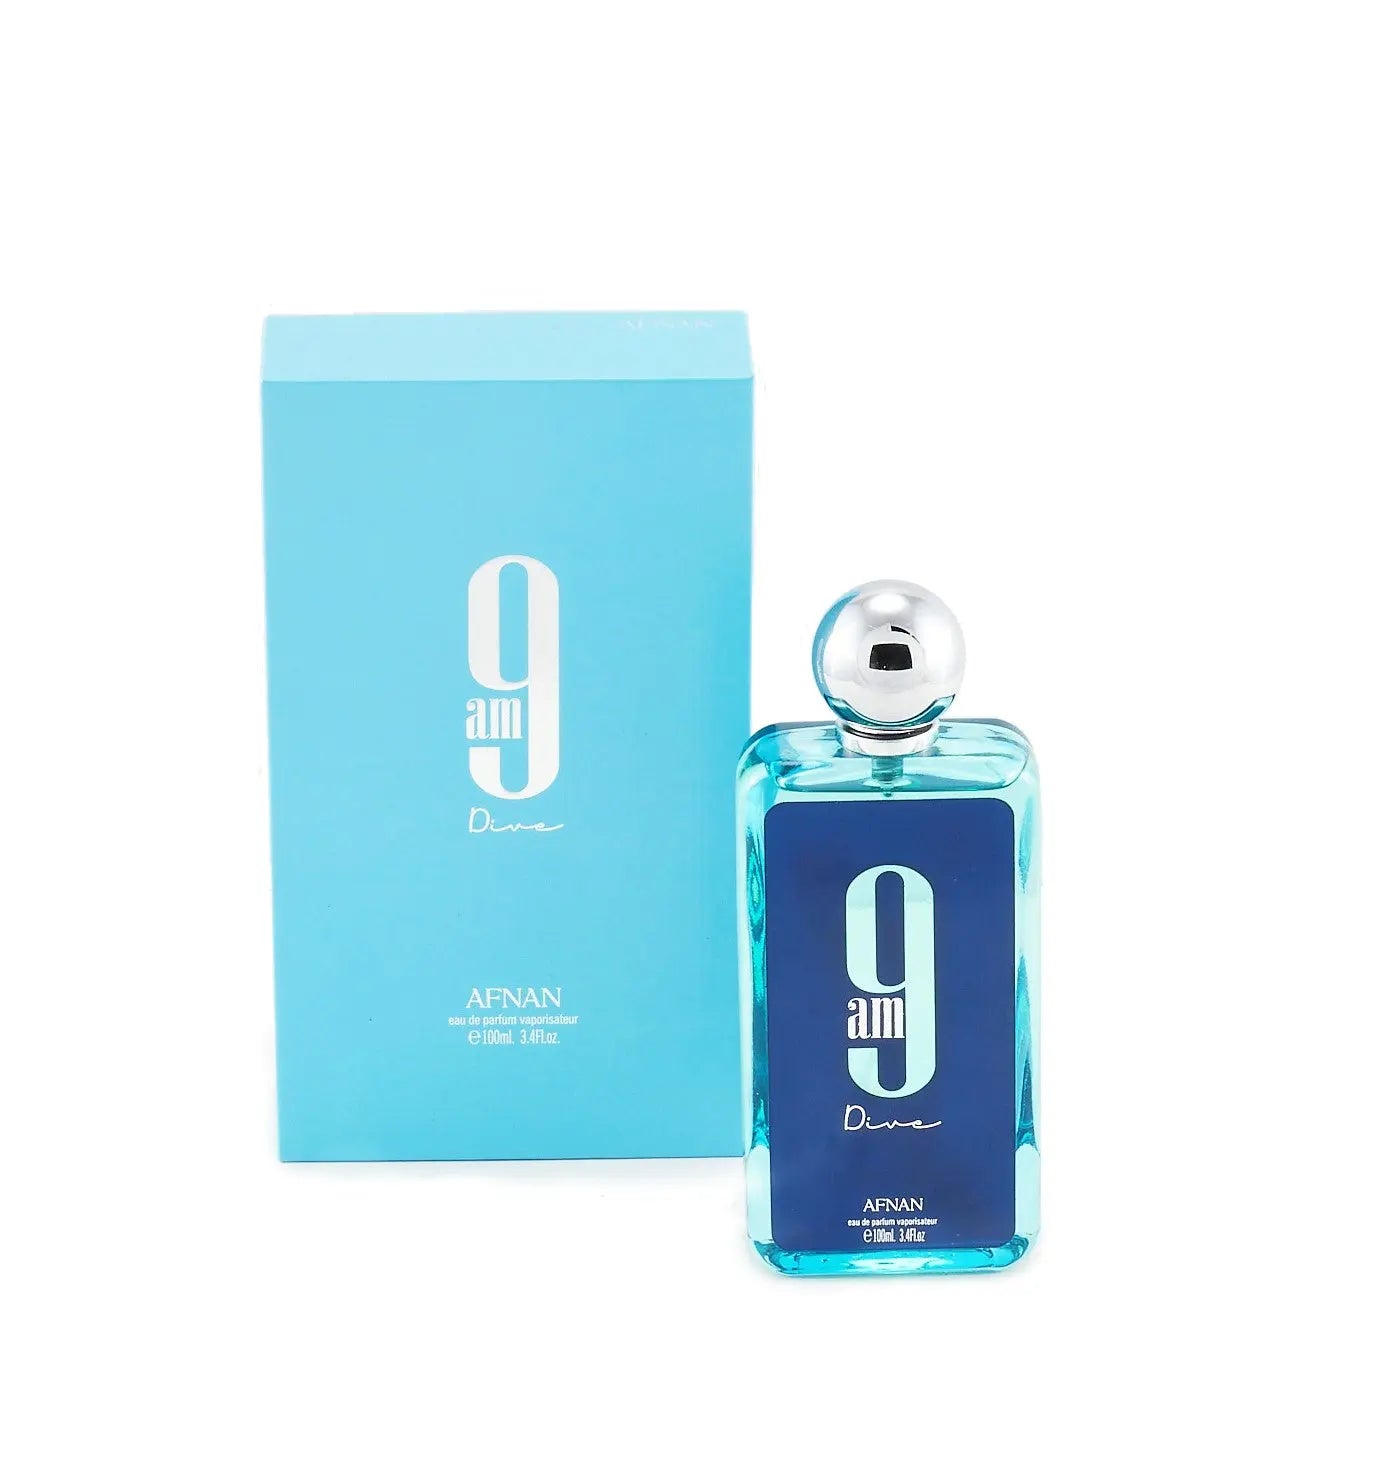 The image features a rectangular glass perfume bottle with a transparent blue tint, accompanied by its matching packaging box. The bottle has a large white "9" and the text "am" in a smaller font, with "Dive" written in cursive below it. Above the "9," there's a silver spherical cap. "9 am Dive" and "AFNAN" branding, along with the text "eau de parfum vaporisateur" and the volume "100ml | 3.4fl.oz". The background is a plain white surface with a slight shadow cast by the bottle and box. 